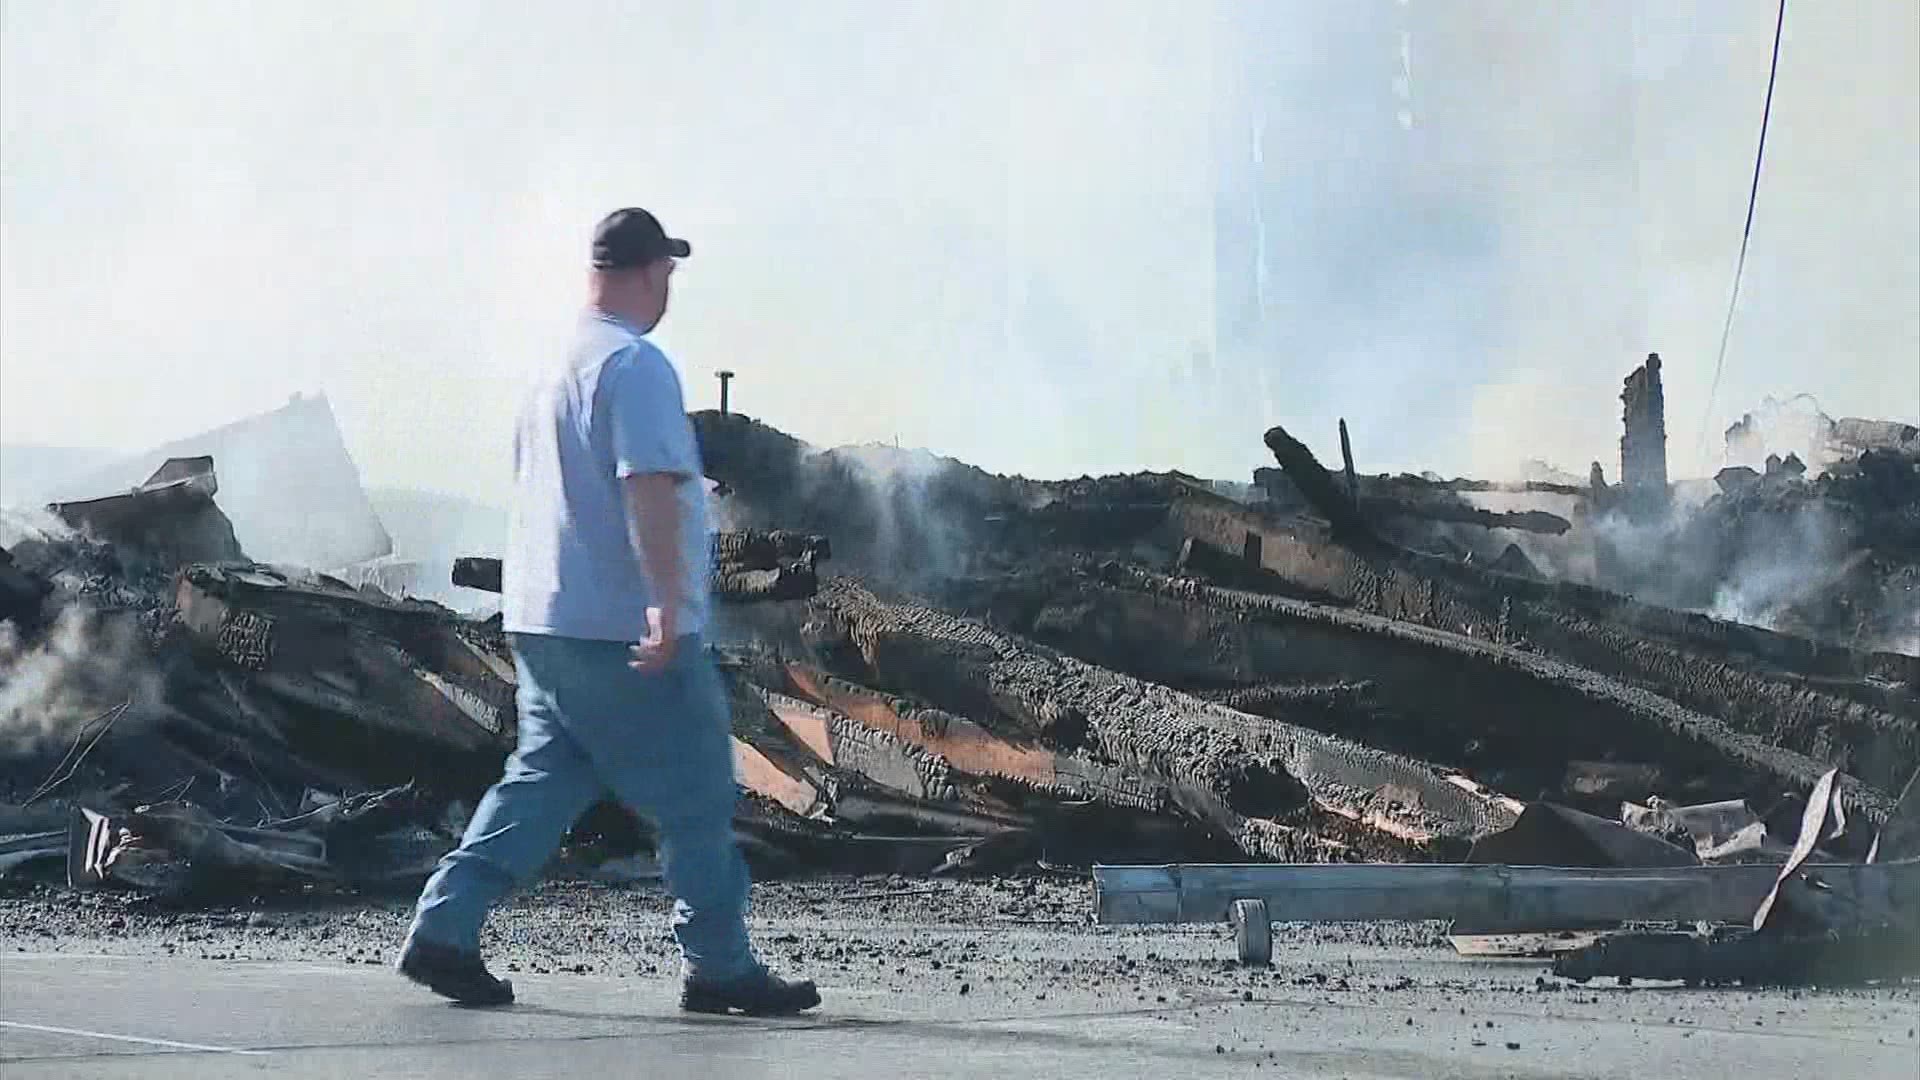 A community in Union County hopes to rebuild and grow stronger together after fire at the church